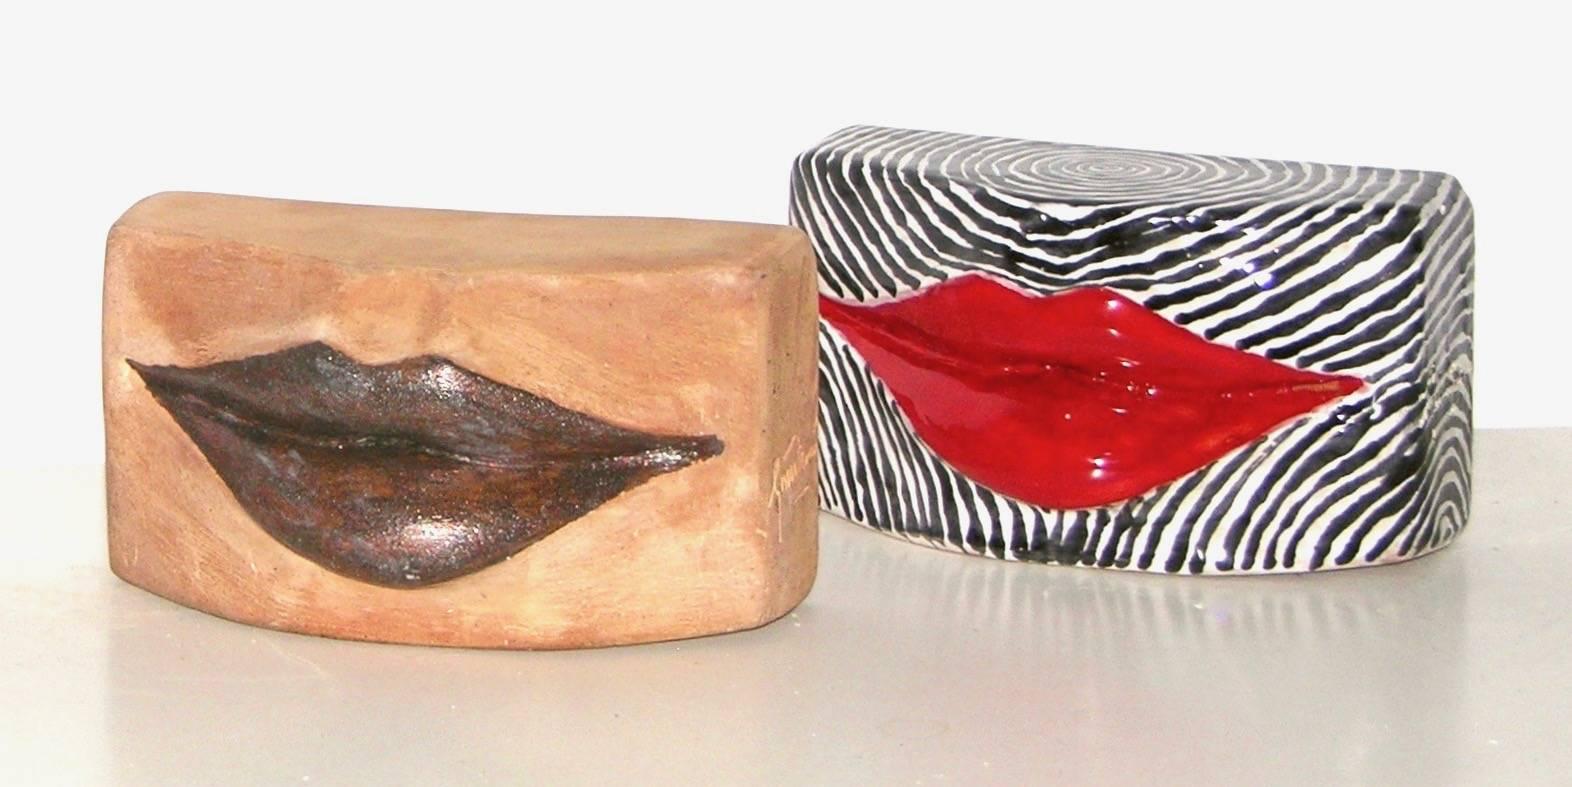 Hand-Crafted Red Lips, Black and White Enameled Terra-Cotta Kiss Sculpture